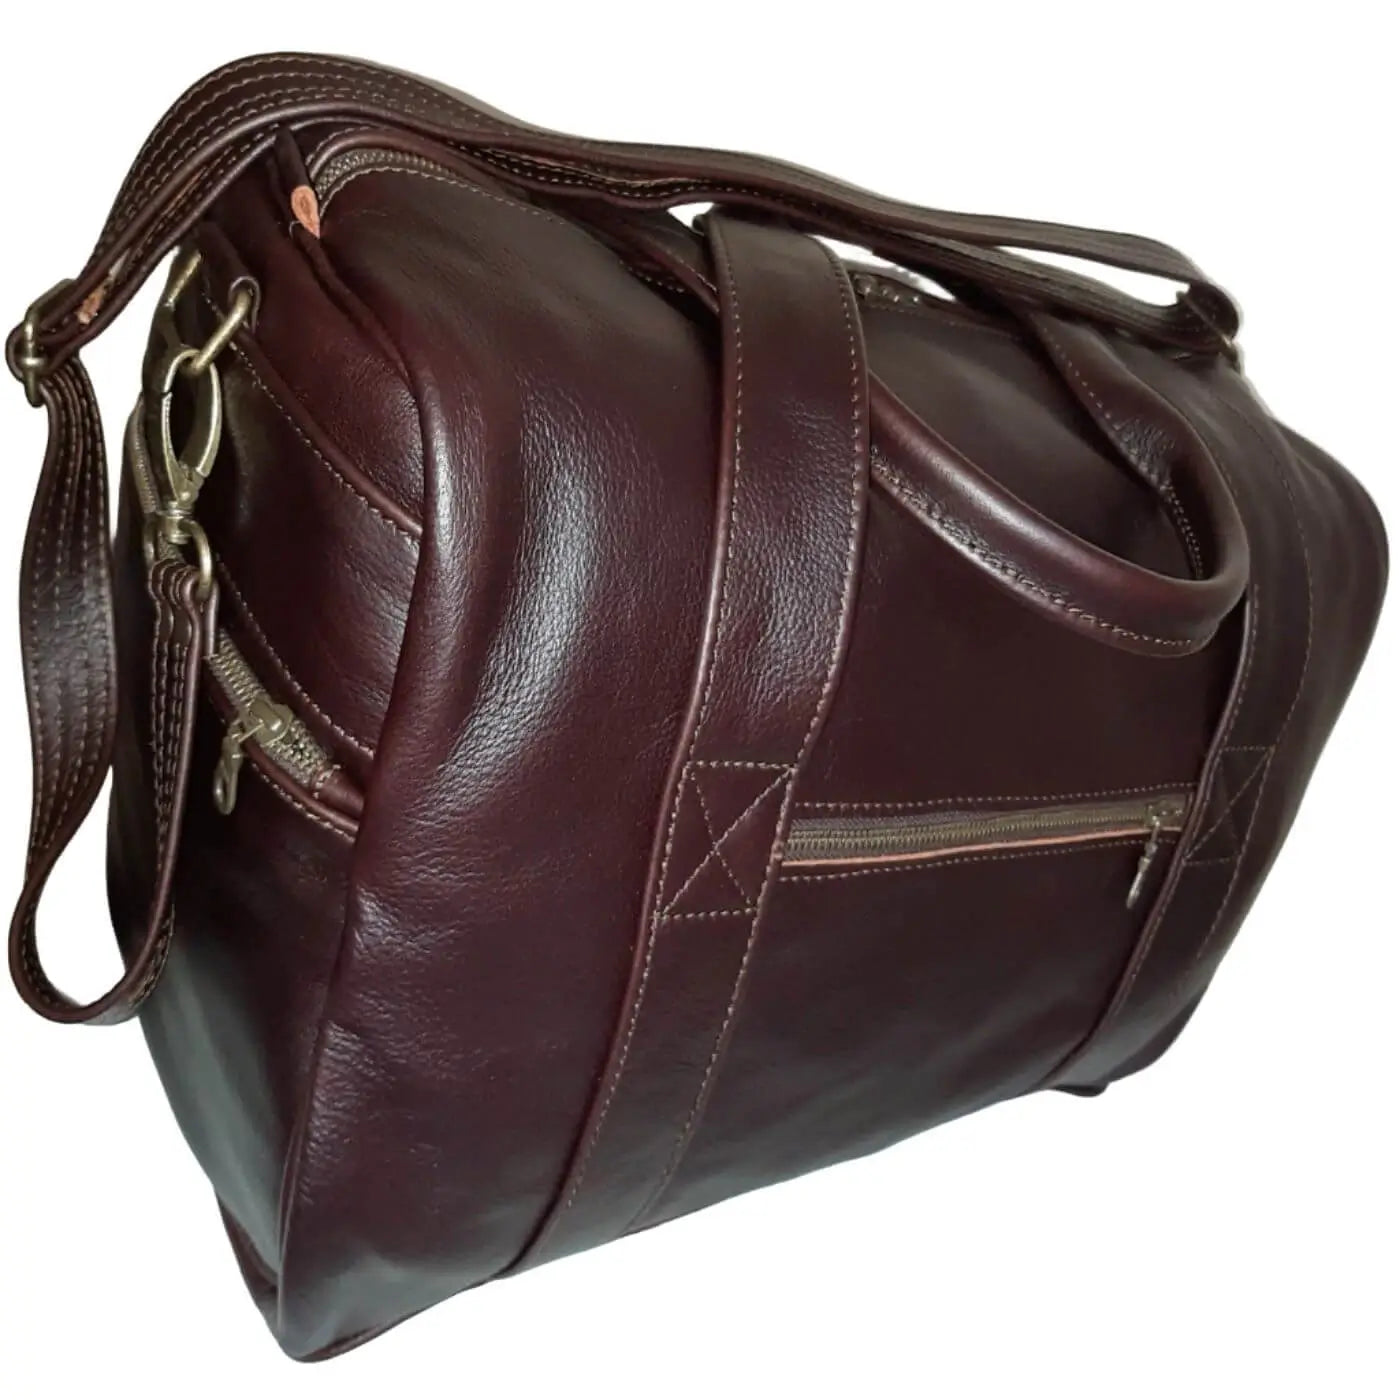 A beautiful Dark tan Anny Marie travel bag from Cape Masai Leather